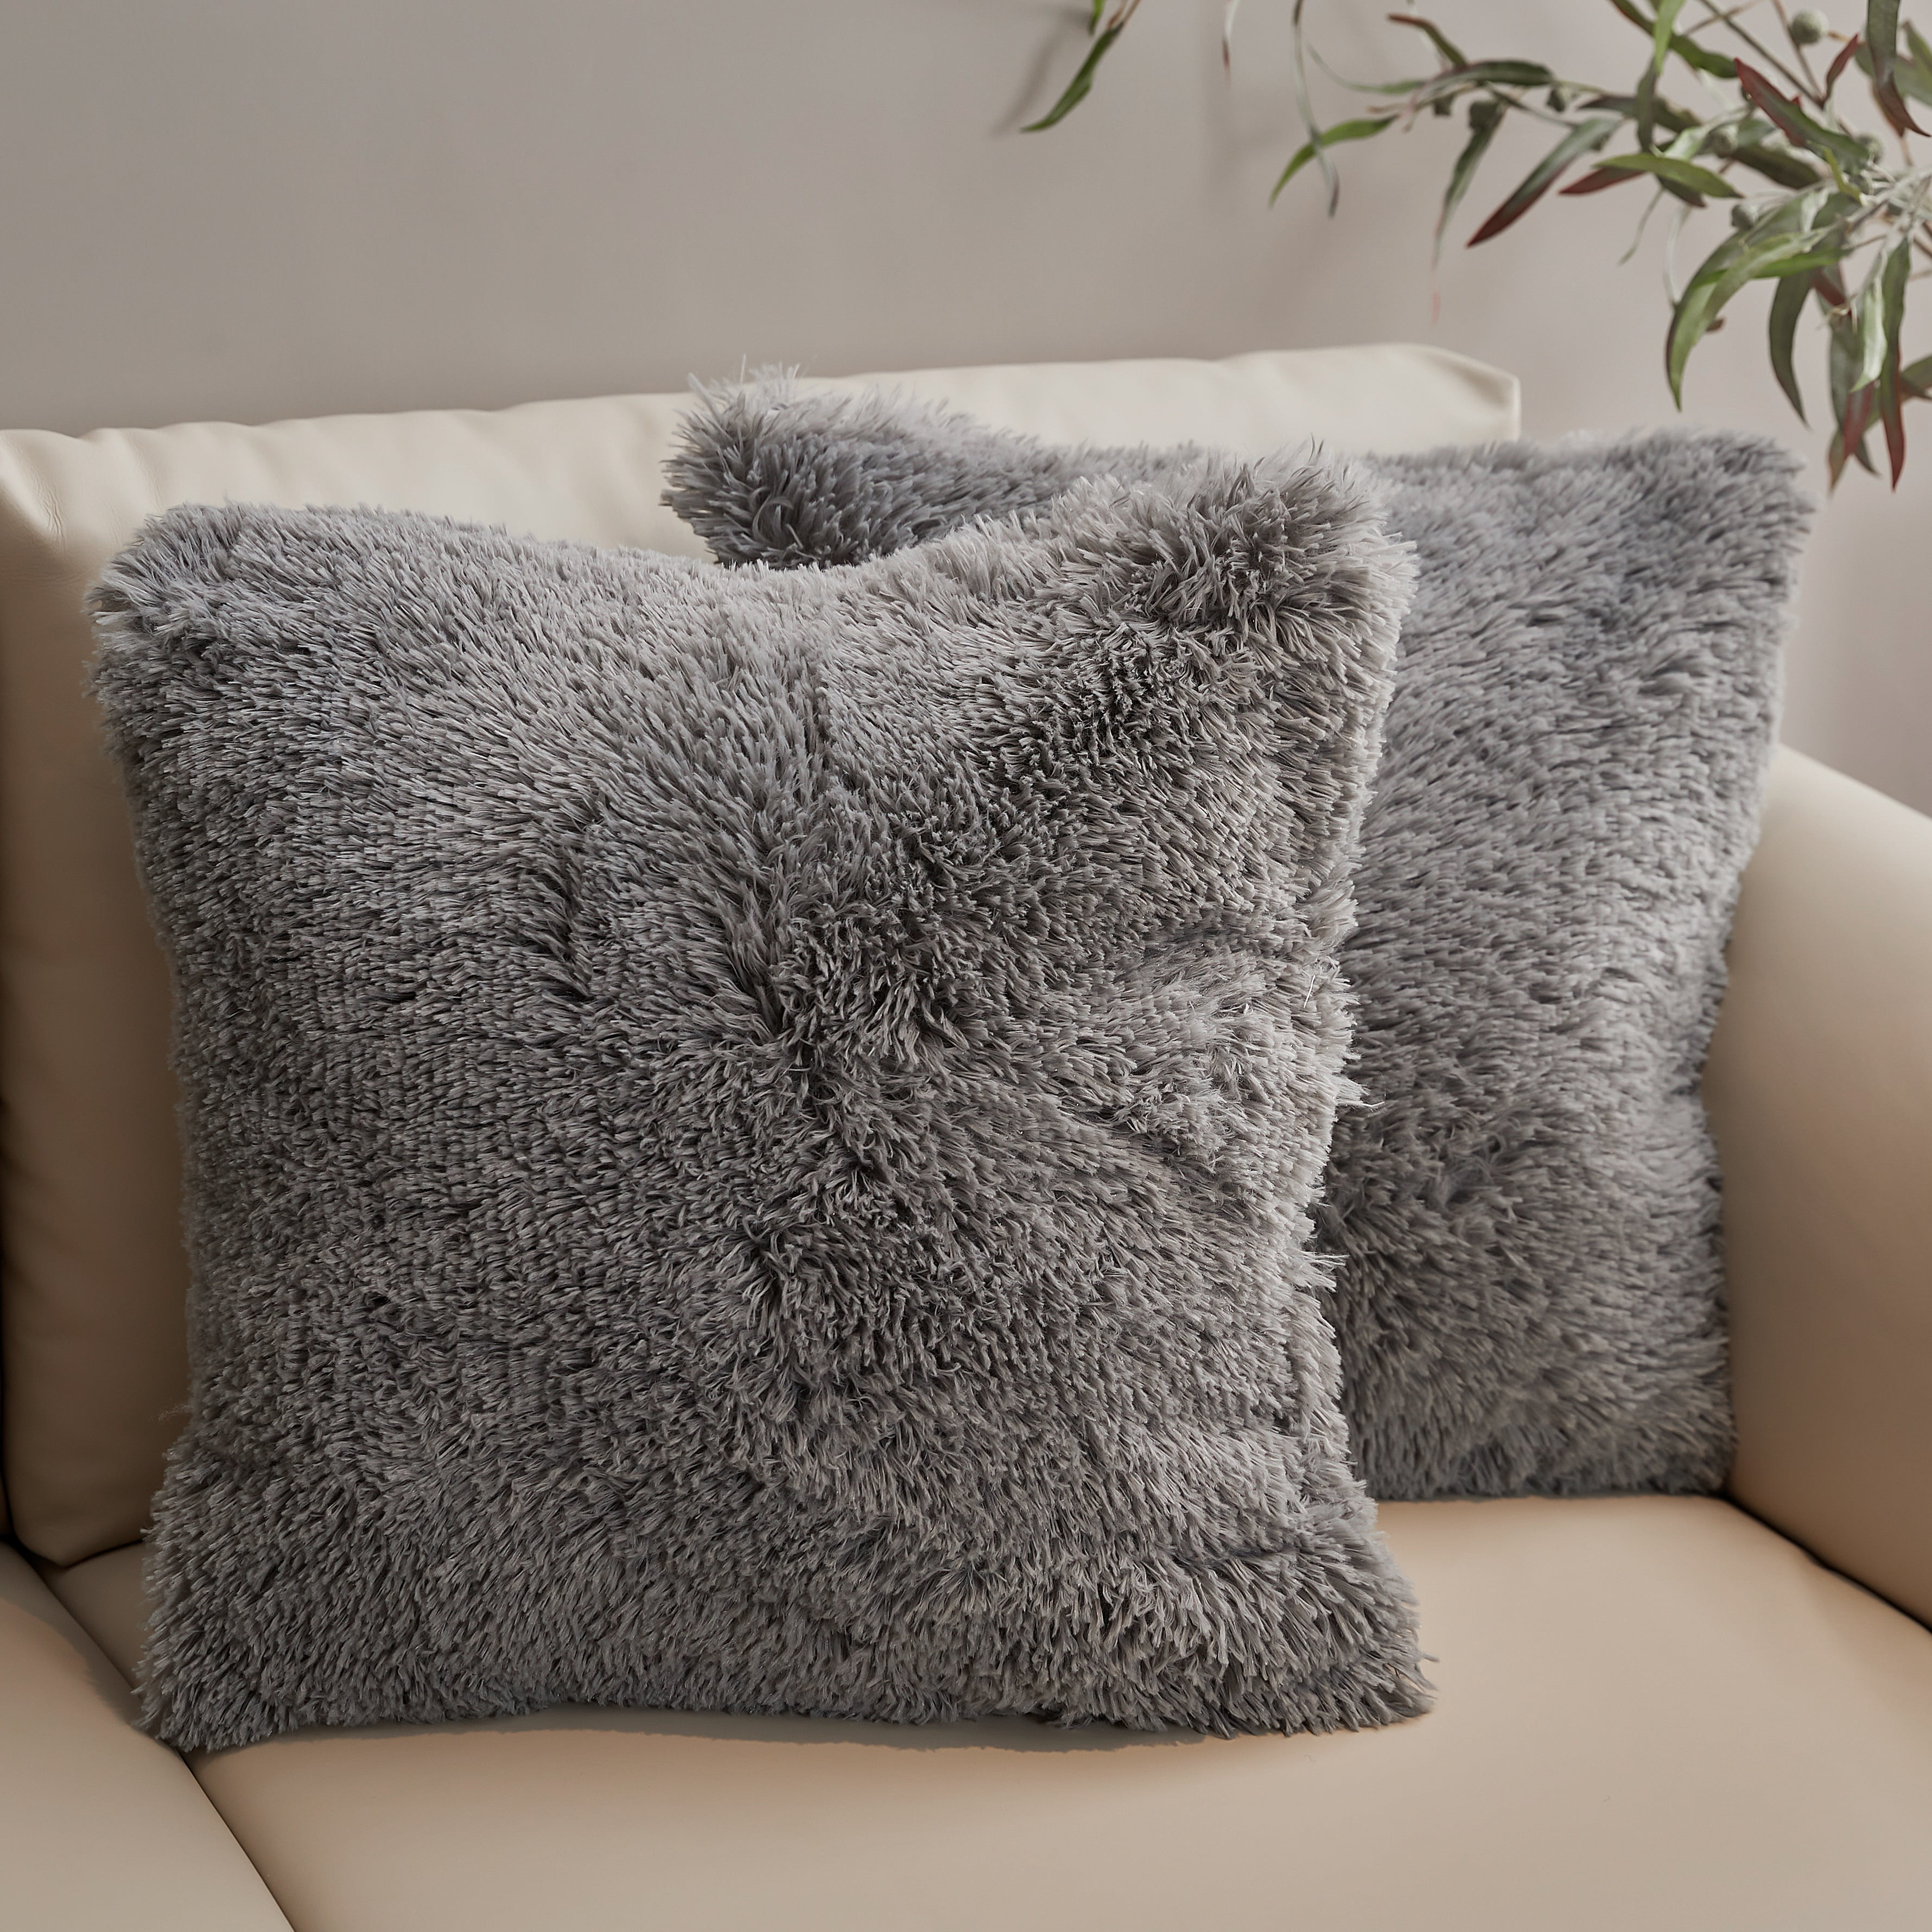 Cheer Collection Shaggy Long Hair Plush Faux Fur Lumbar Accent Pillows - 12  x 20 - Set of 2, 1 - Fry's Food Stores